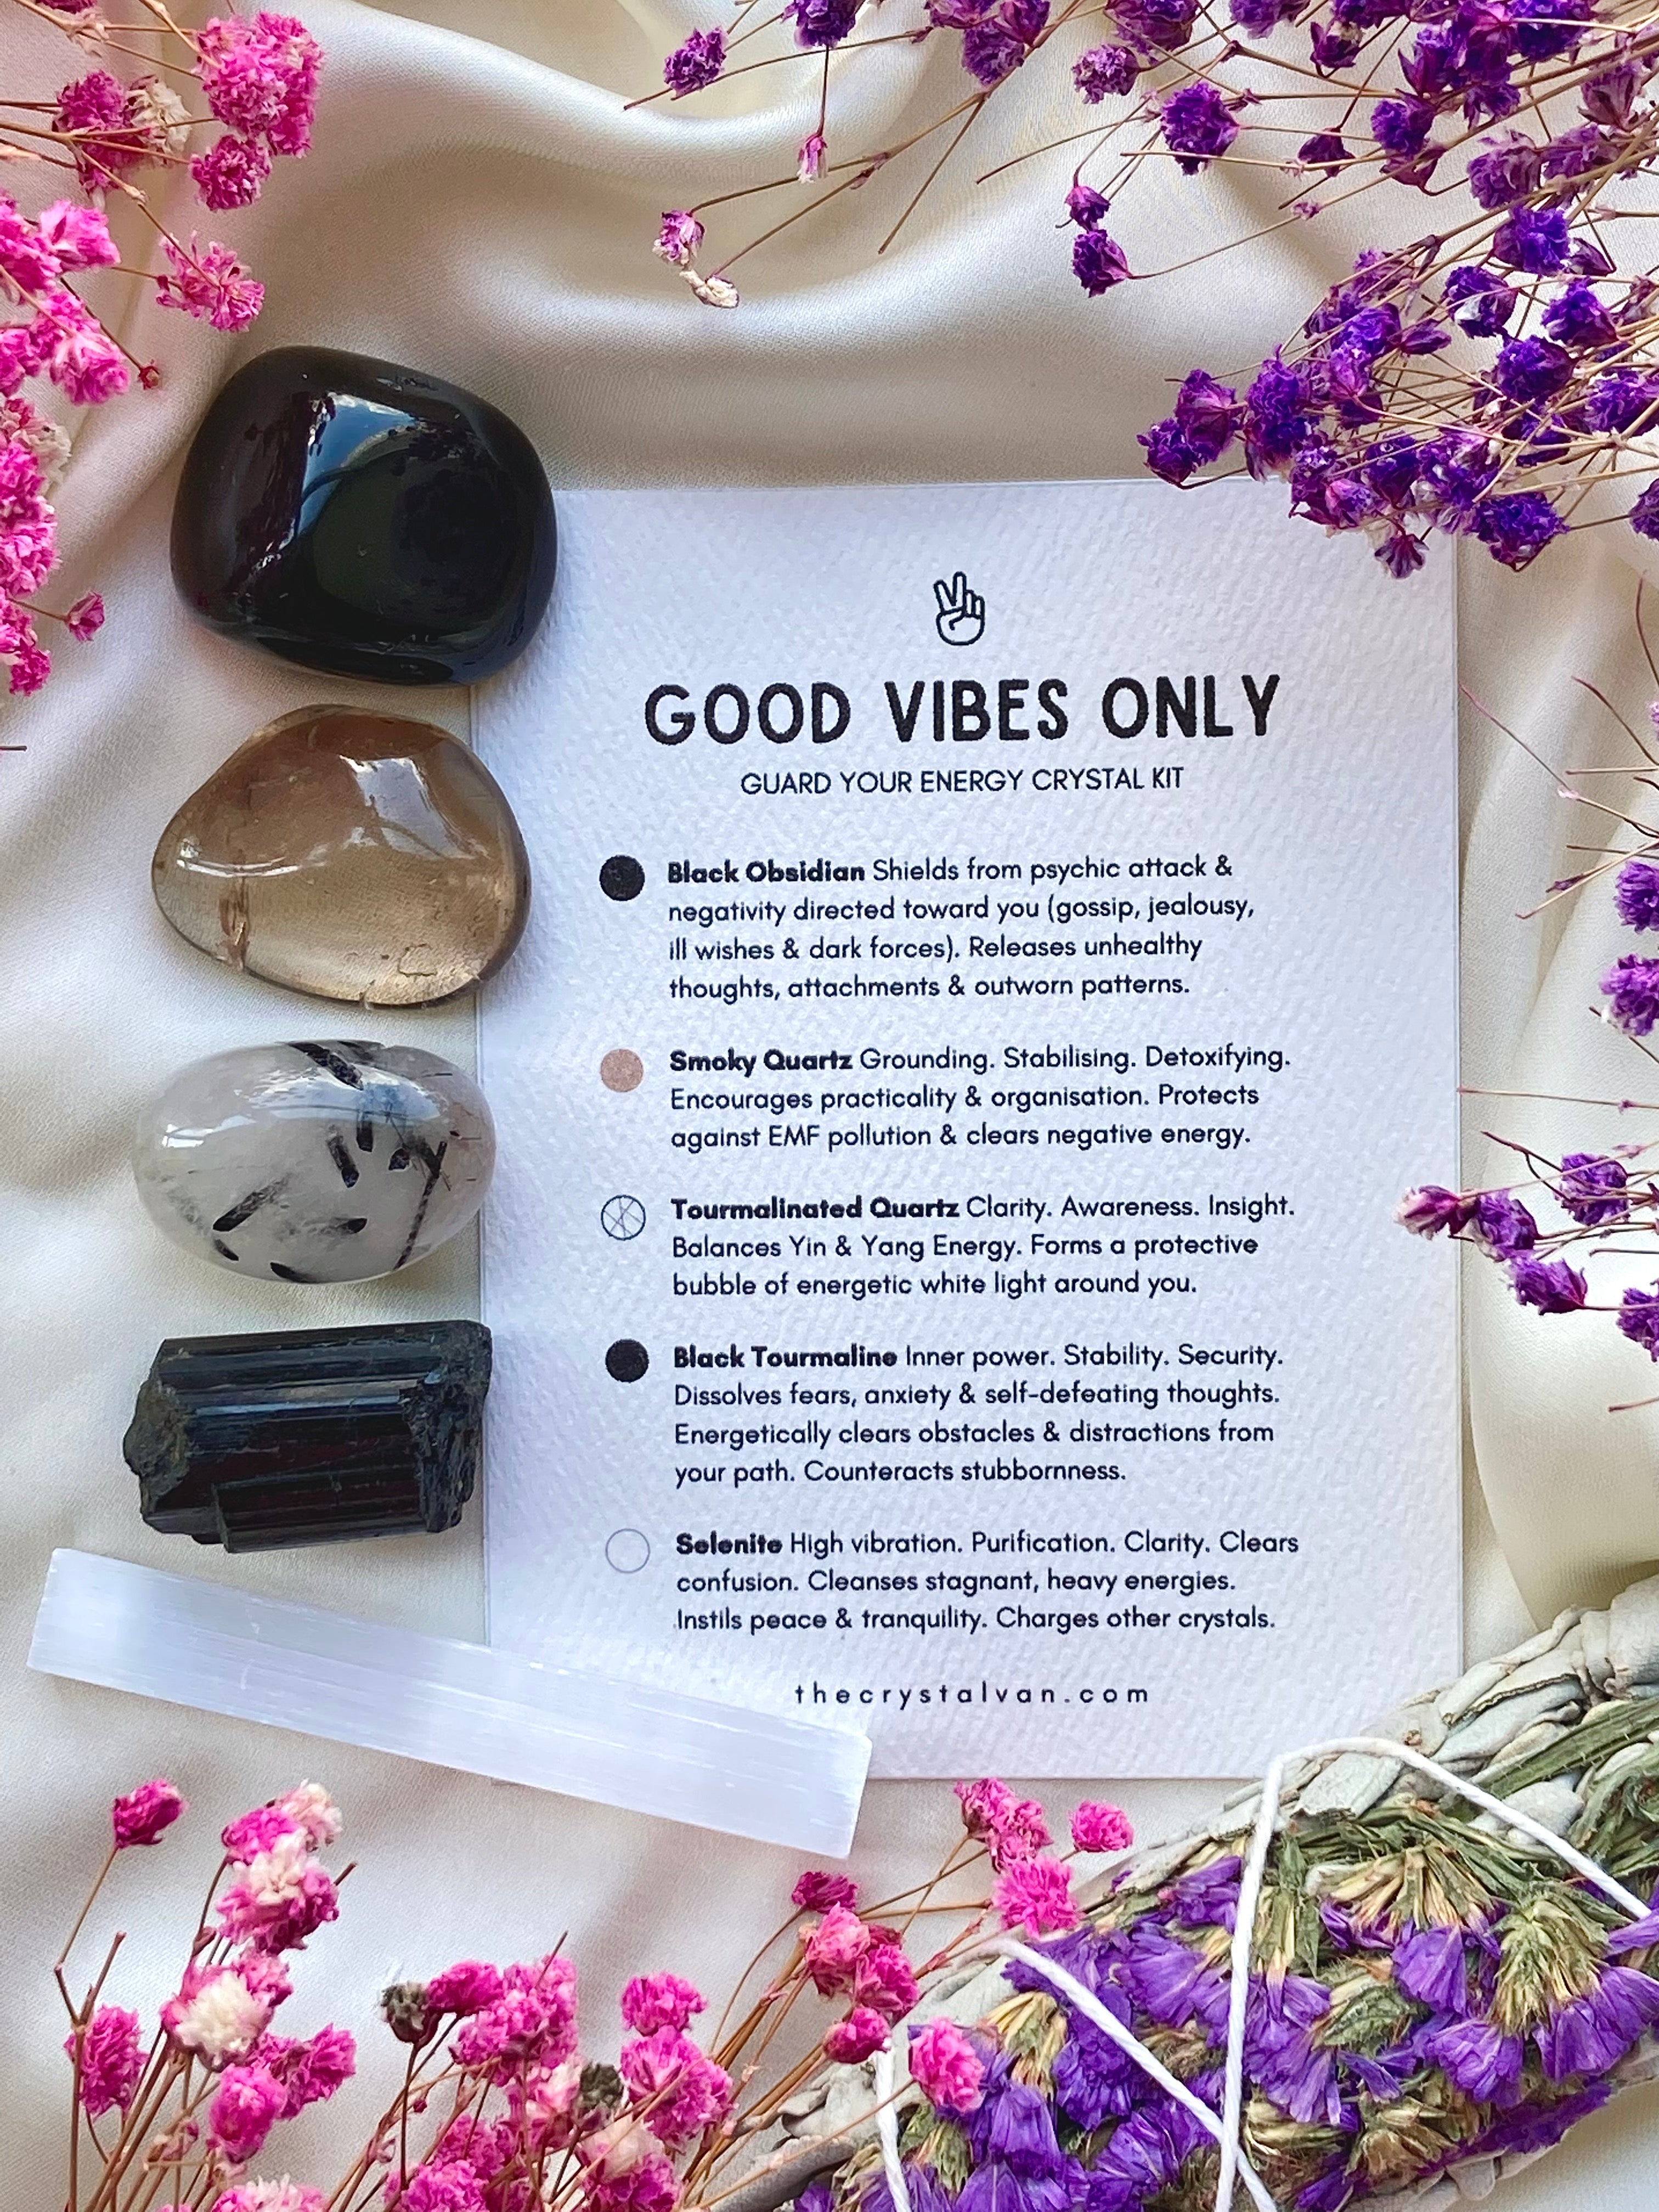 Our Intention Crystal Kits